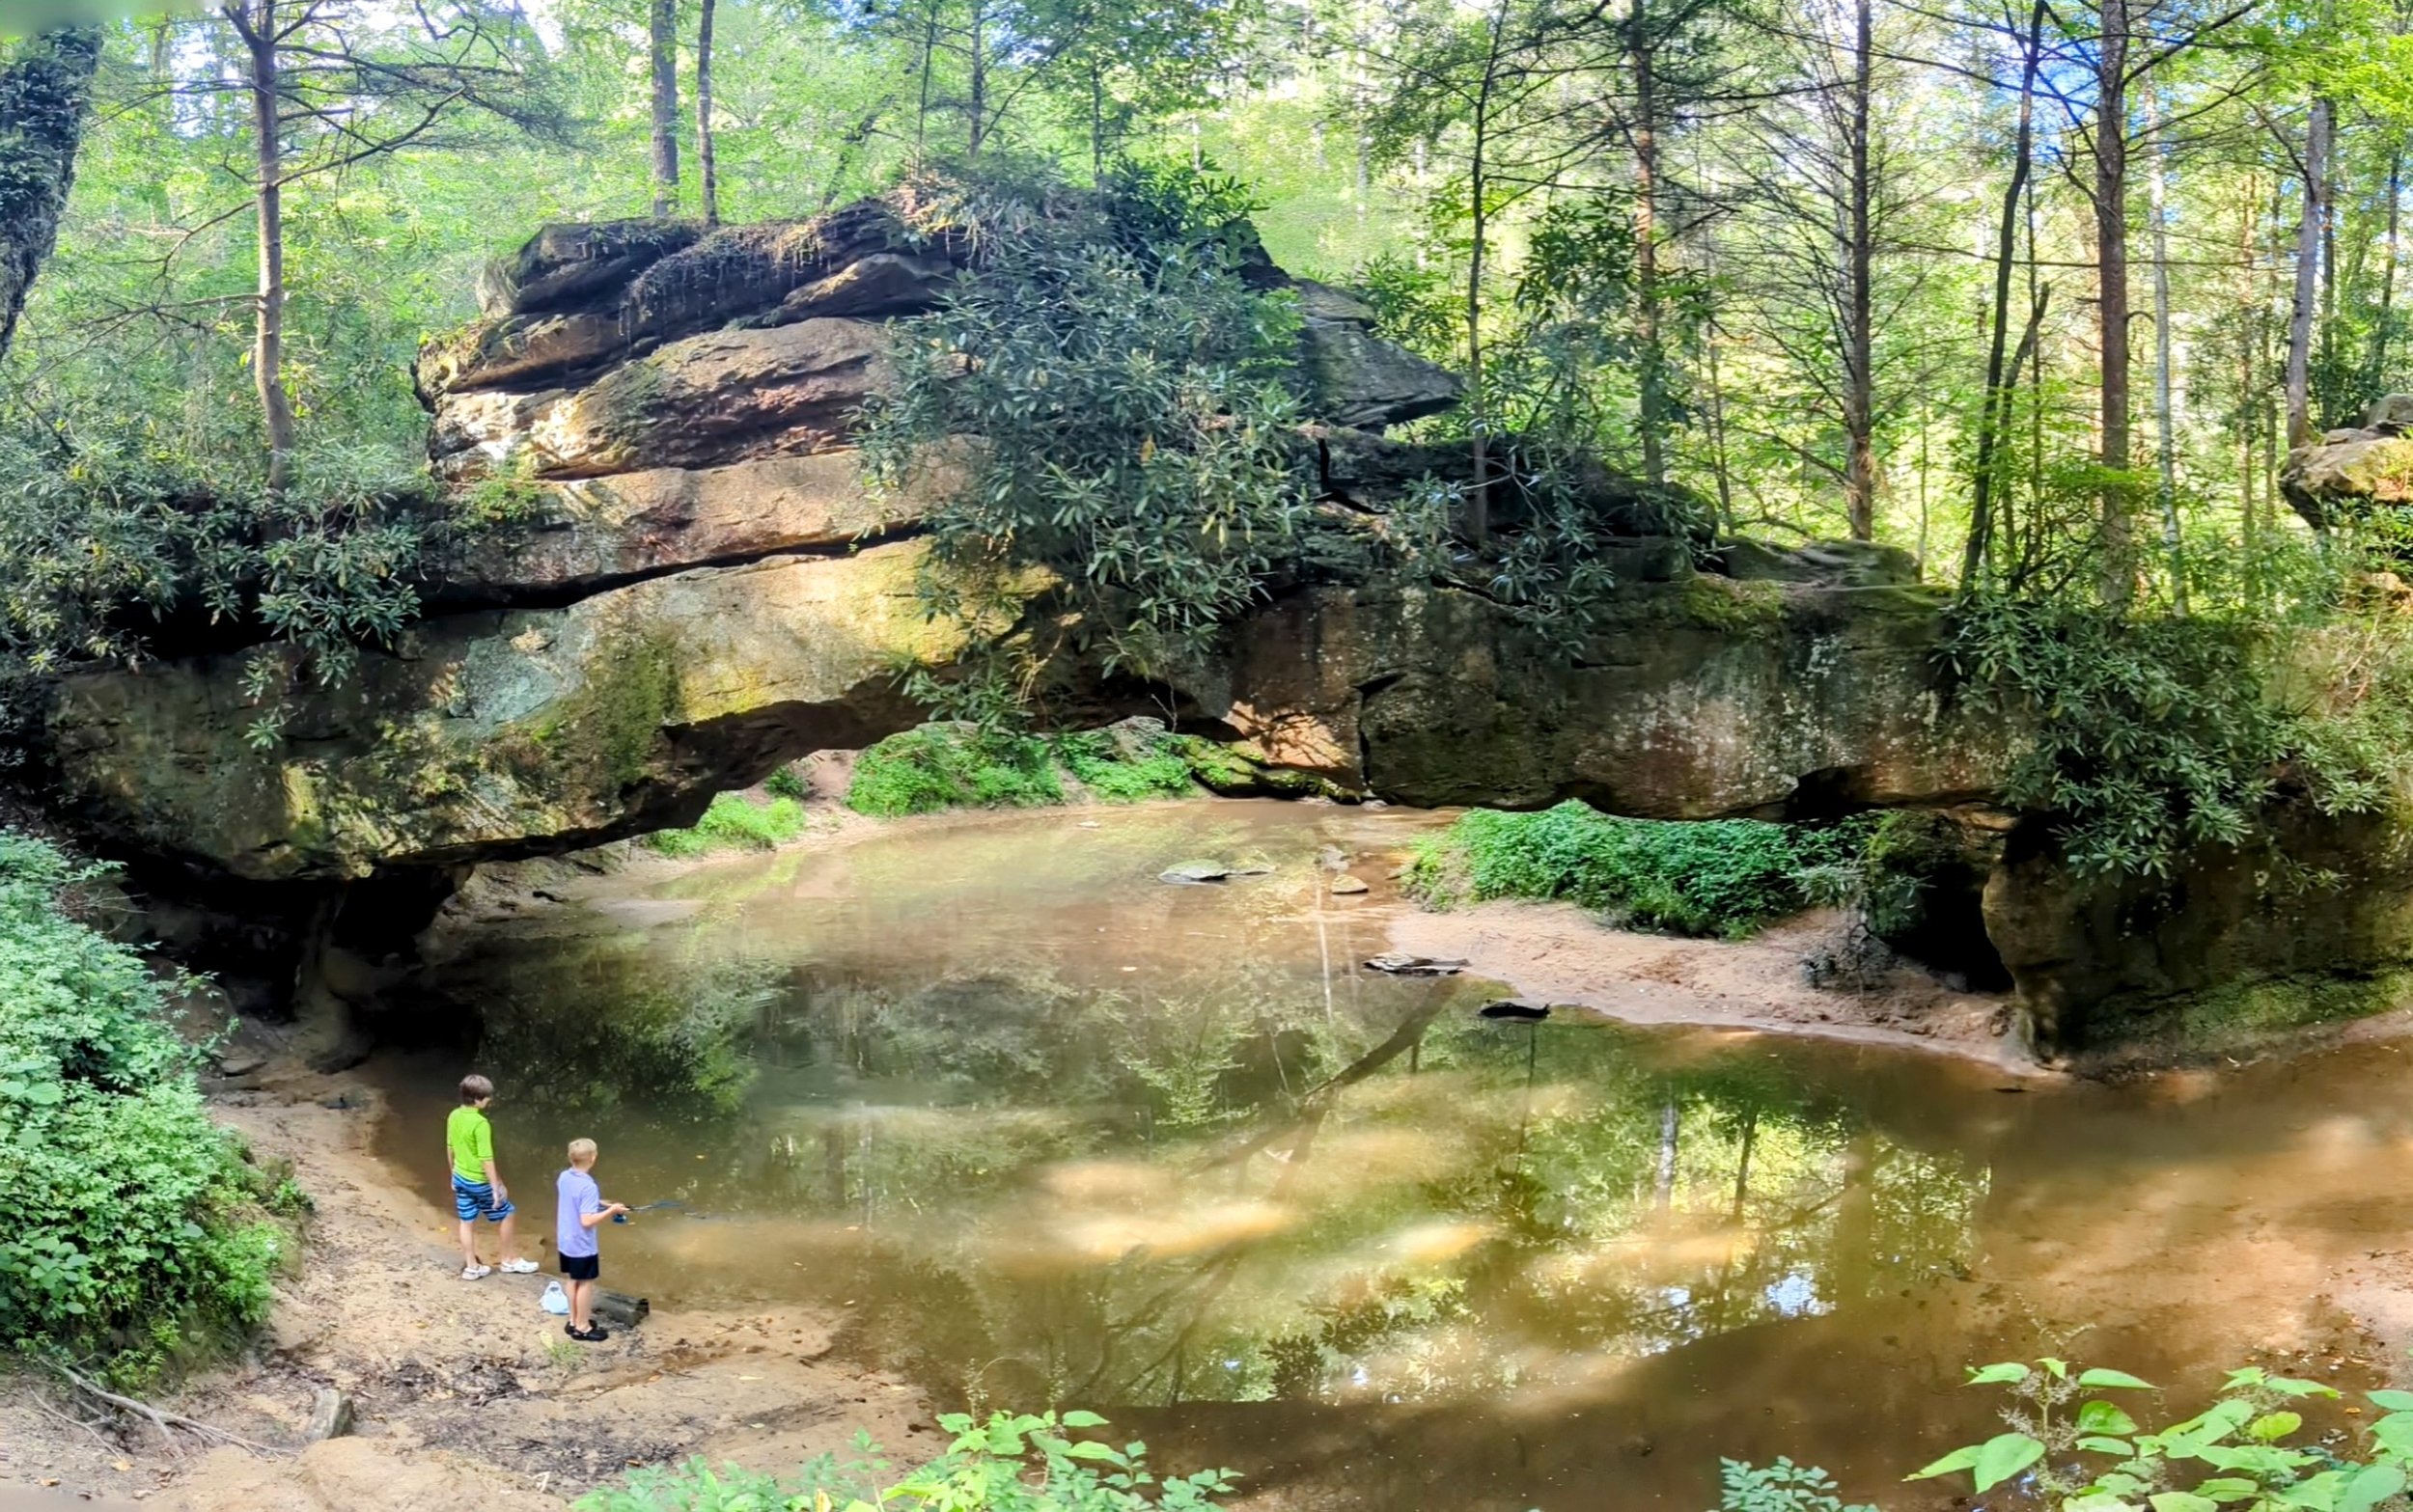 The best hike for kids in the Red River Gorge: Rock Bridge and Creation Falls